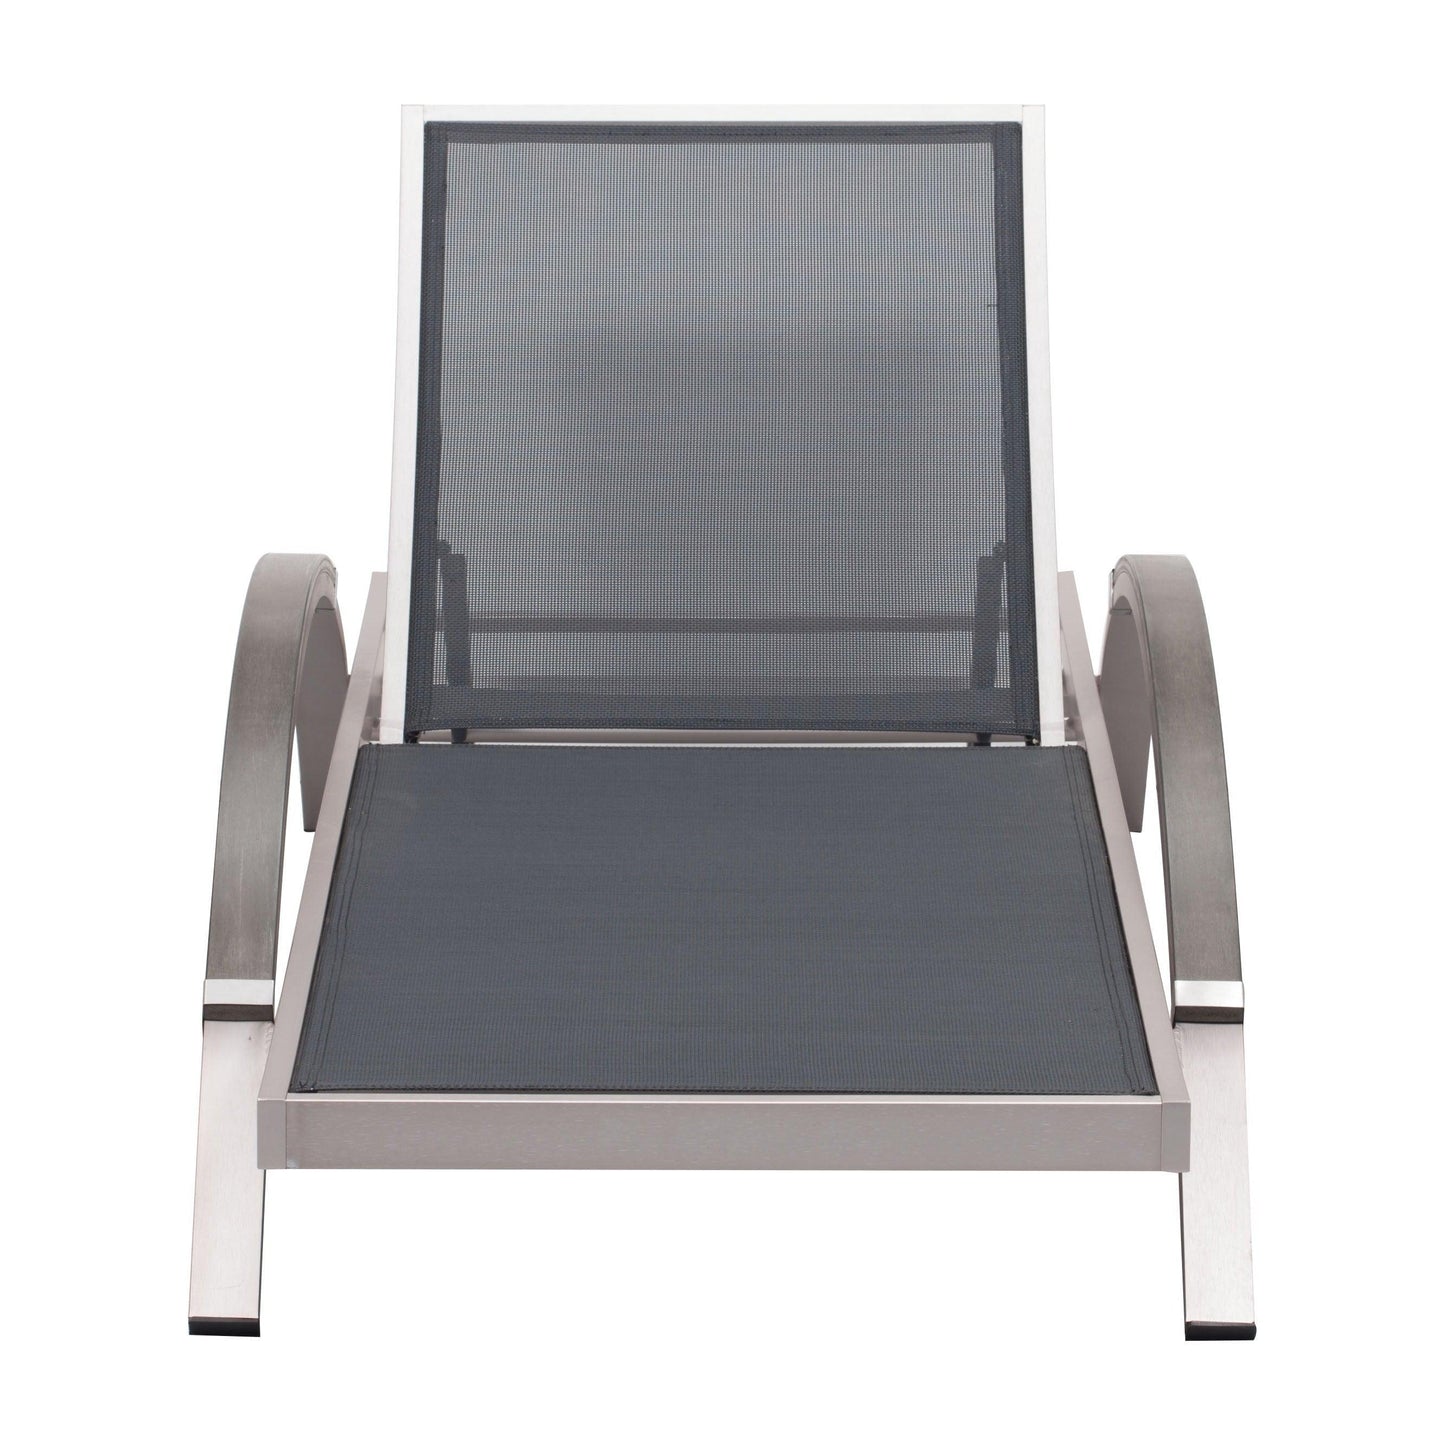 Metropolitan Outdoor Chaise Lounge Brushed Aluminum - Sideboards and Things Color_Silver, Depth_70-80, Features_Indoor/Outdoor Use, Finish_Brushed, Height_0-10, Materials_Metal, Metal Type_Aluminum, Product Type_Chaise, Width_20-30